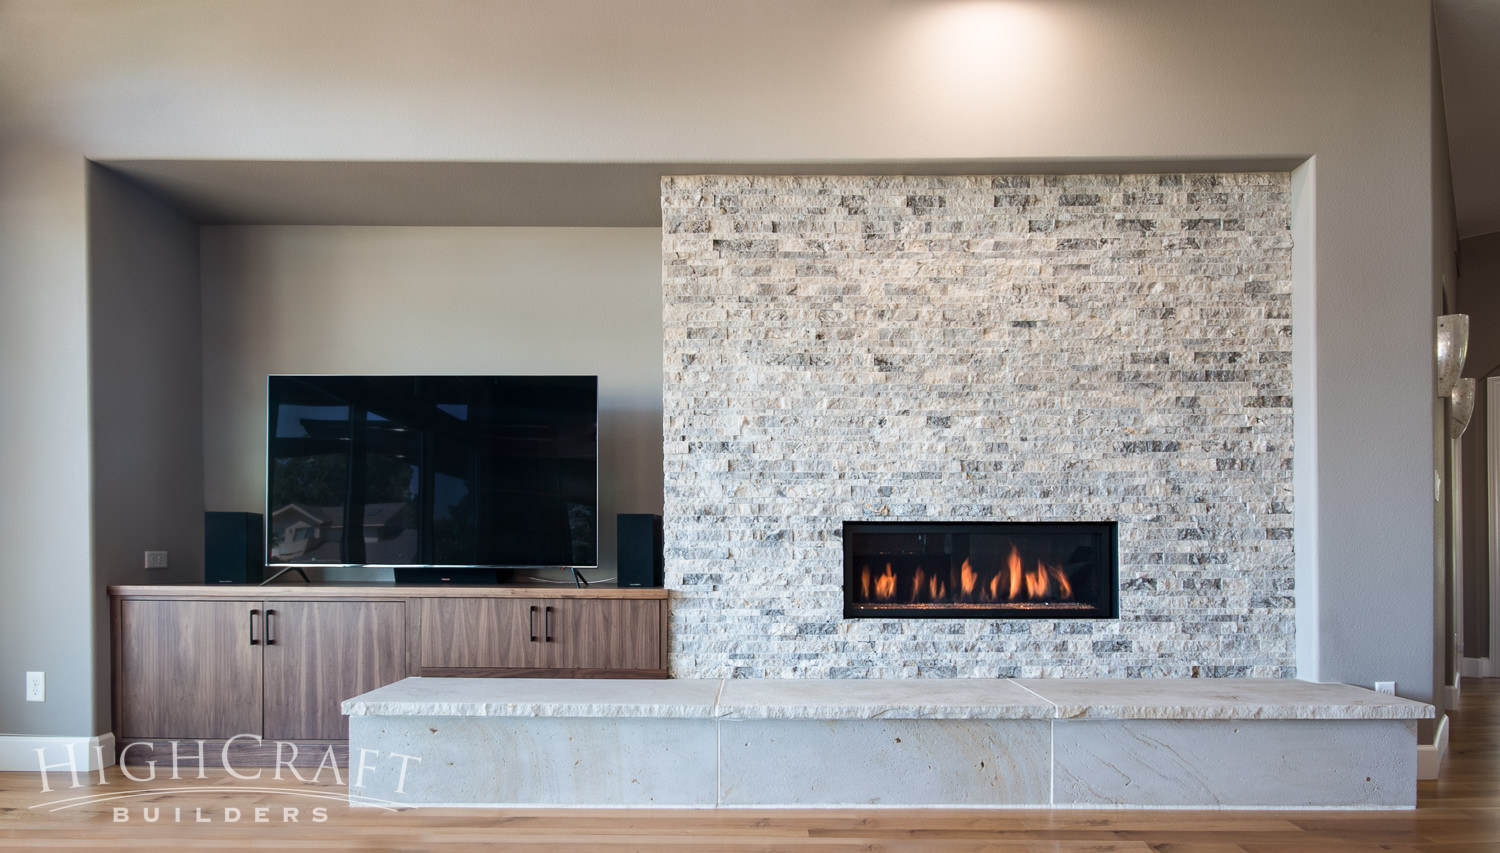 Kitchen-Living-and-Wet-Bar-Remodel-Fireplace-Wall-Stone-Walnut